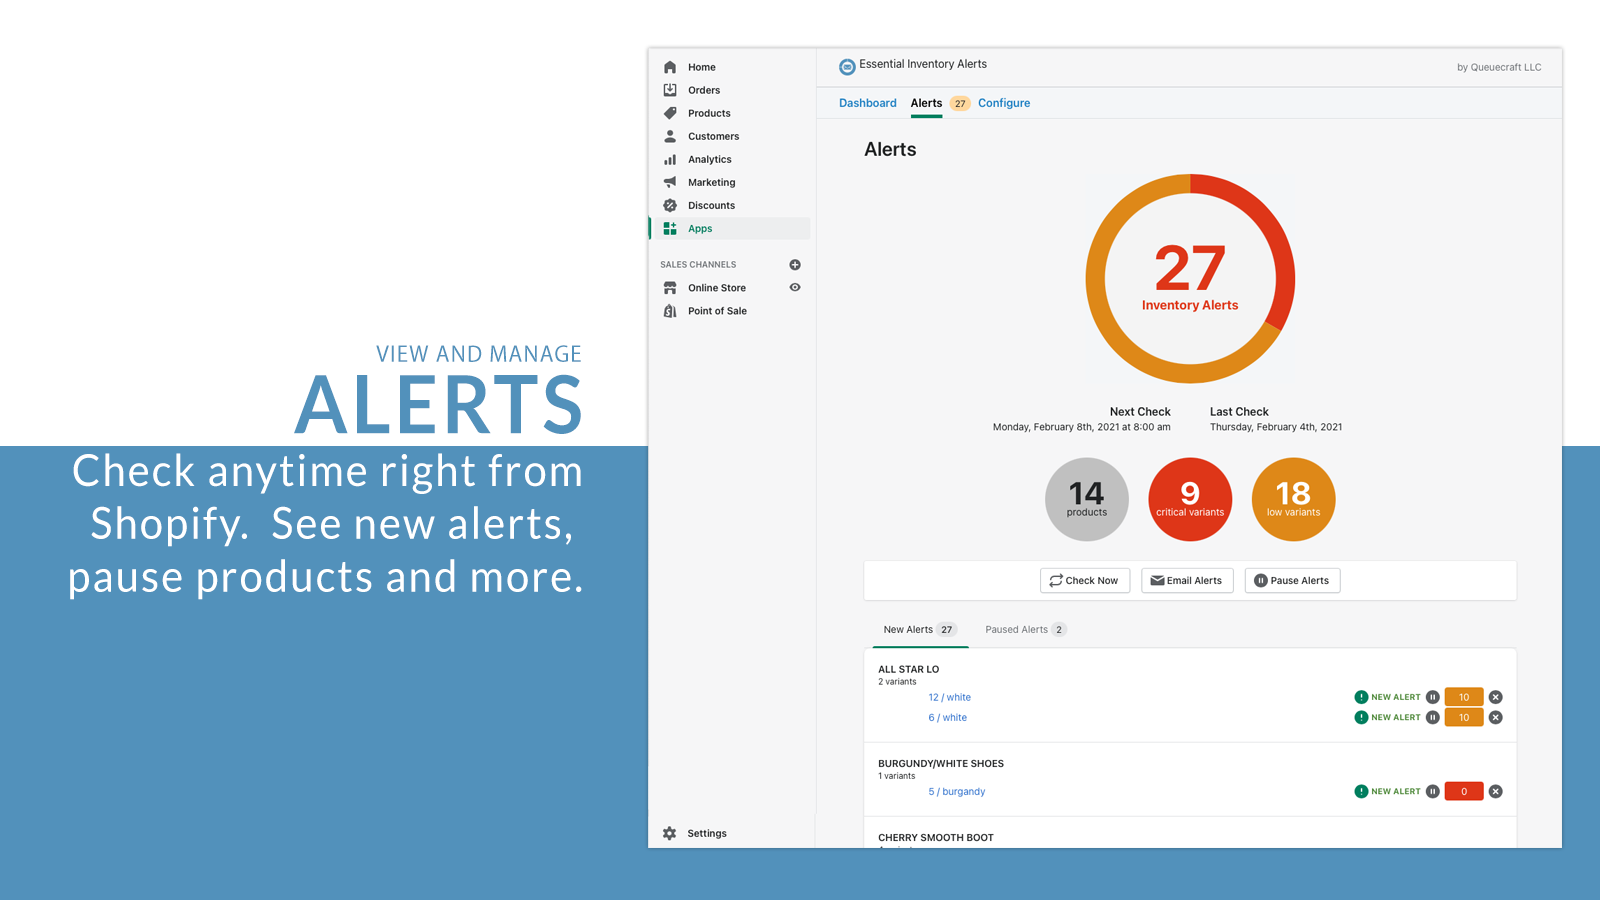 View and manage alerts right from Shopify.